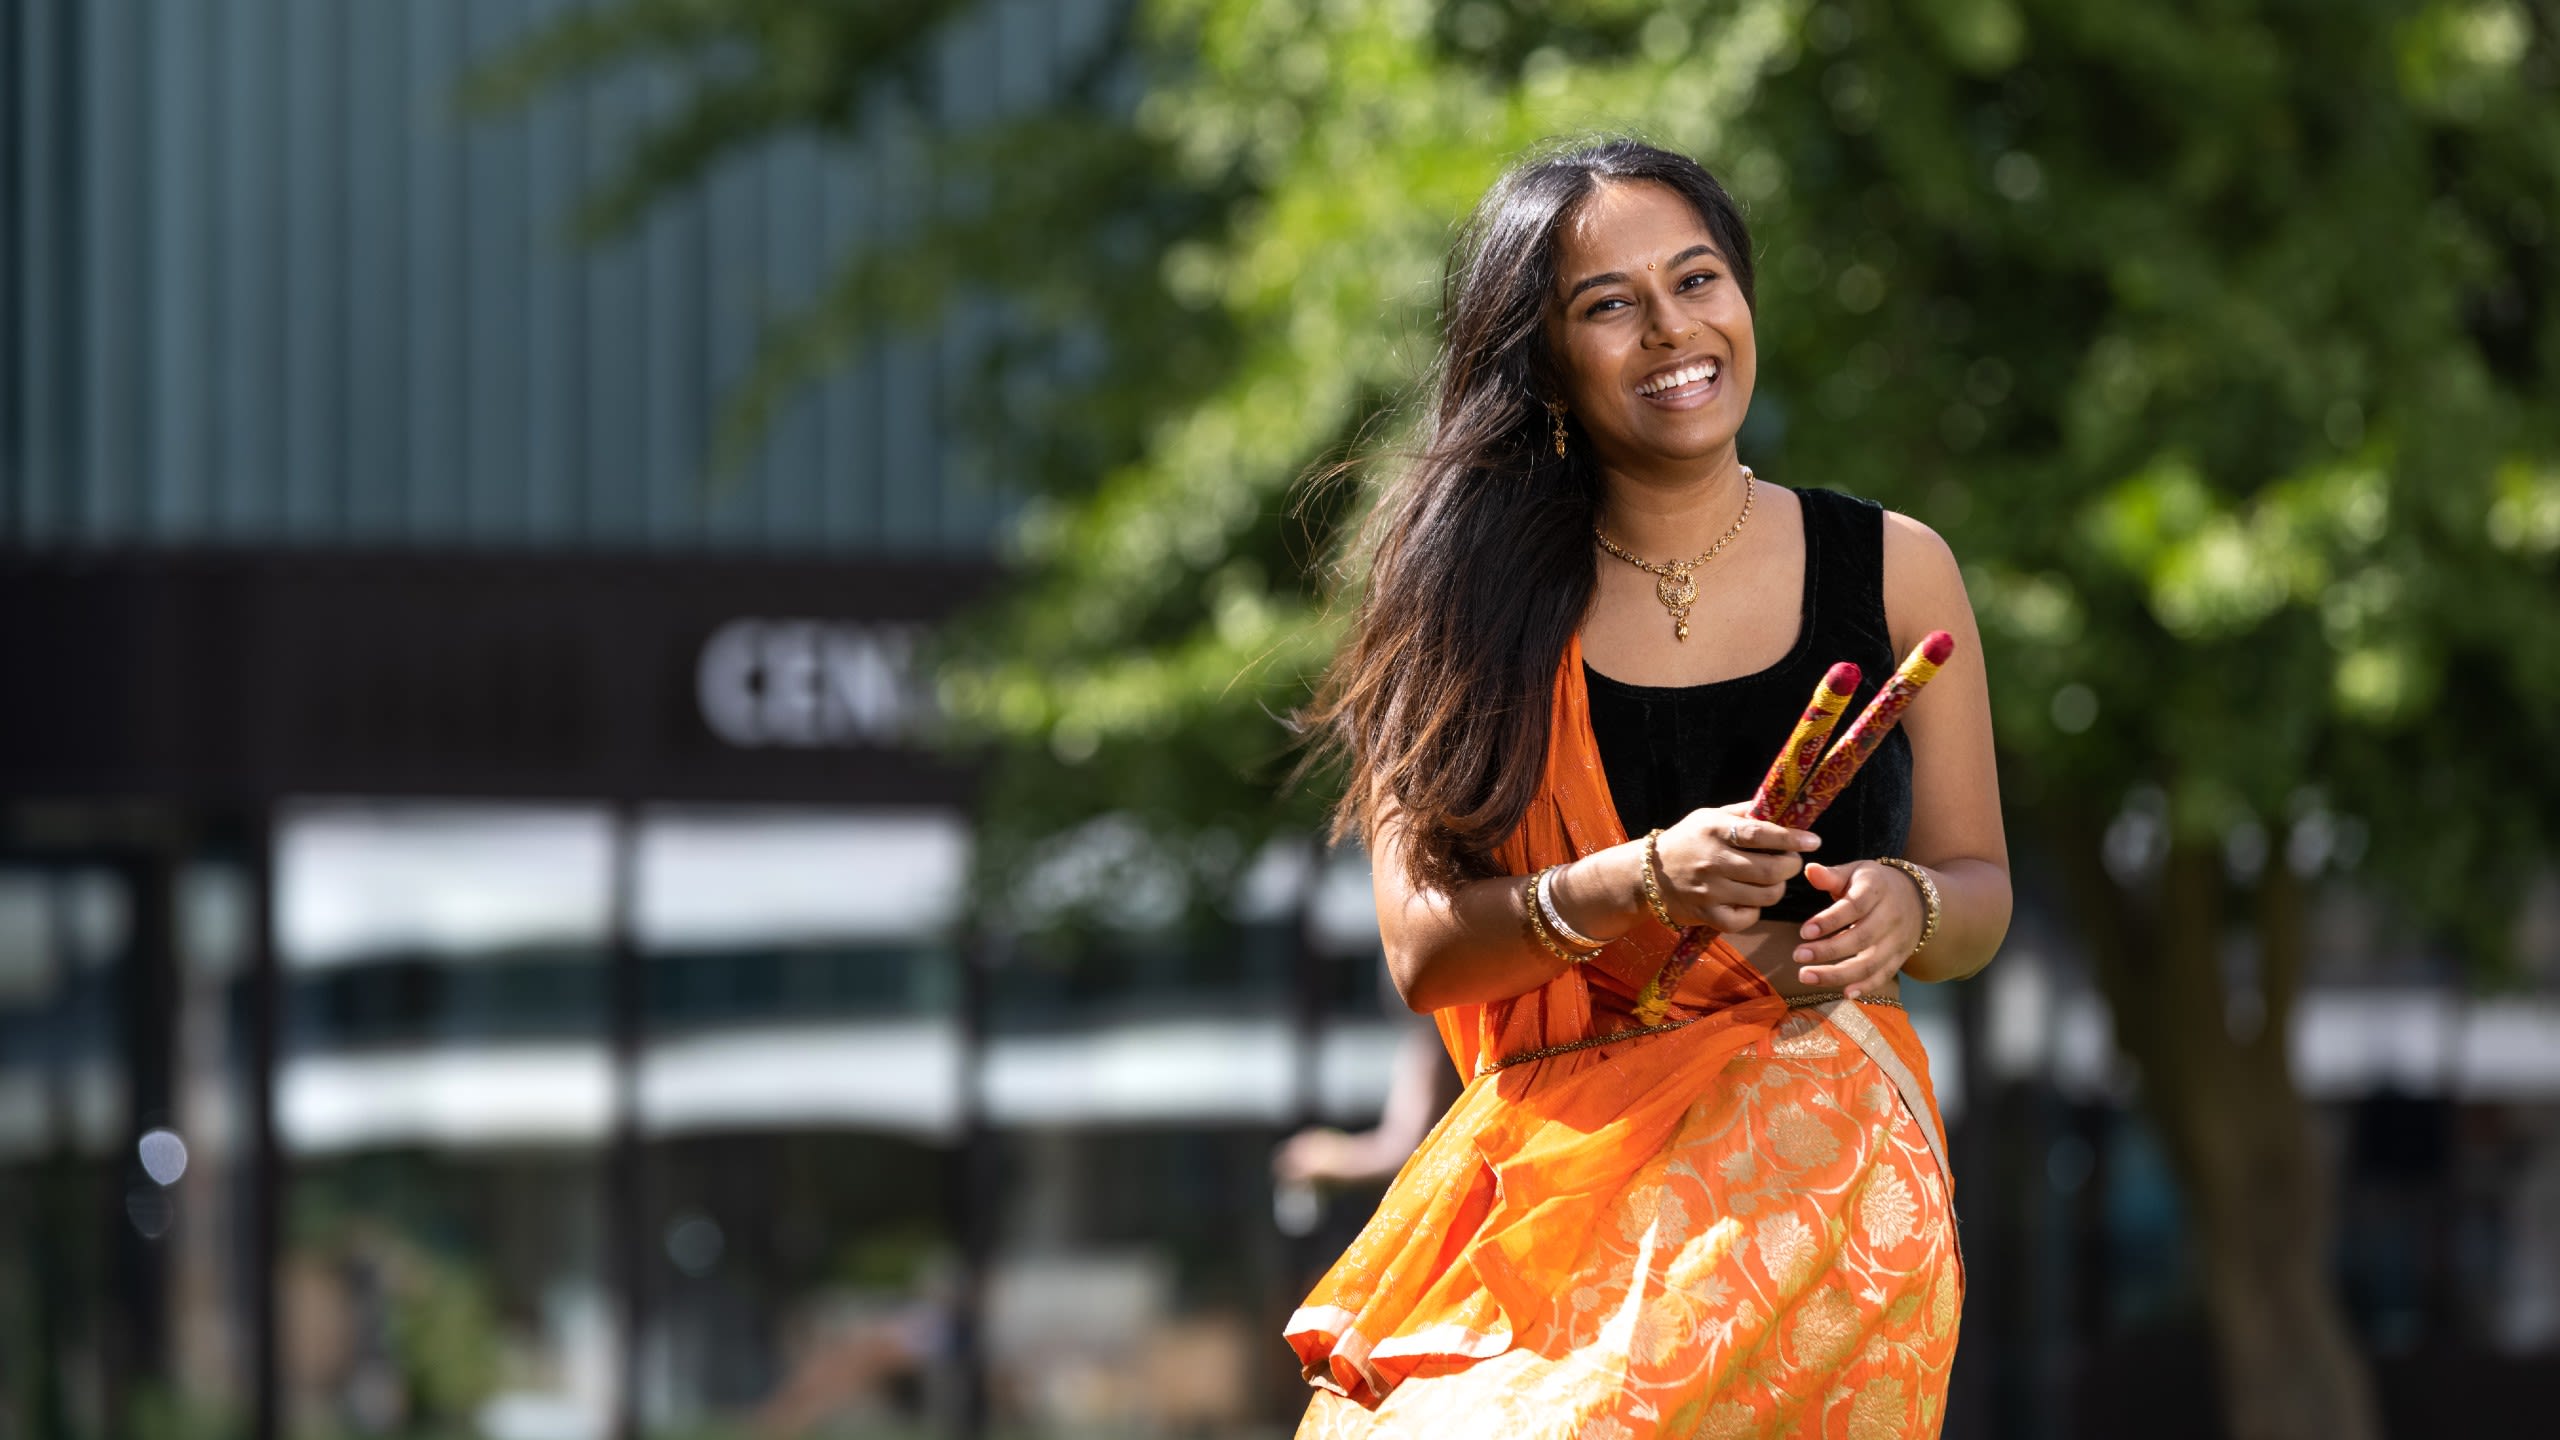 Nandini Bhudia wears a South Asian 'lengha' outfit (black crop top and orange embroidered skirt with a long scarf) and holds two dancing sticks used to perform a cultural dance